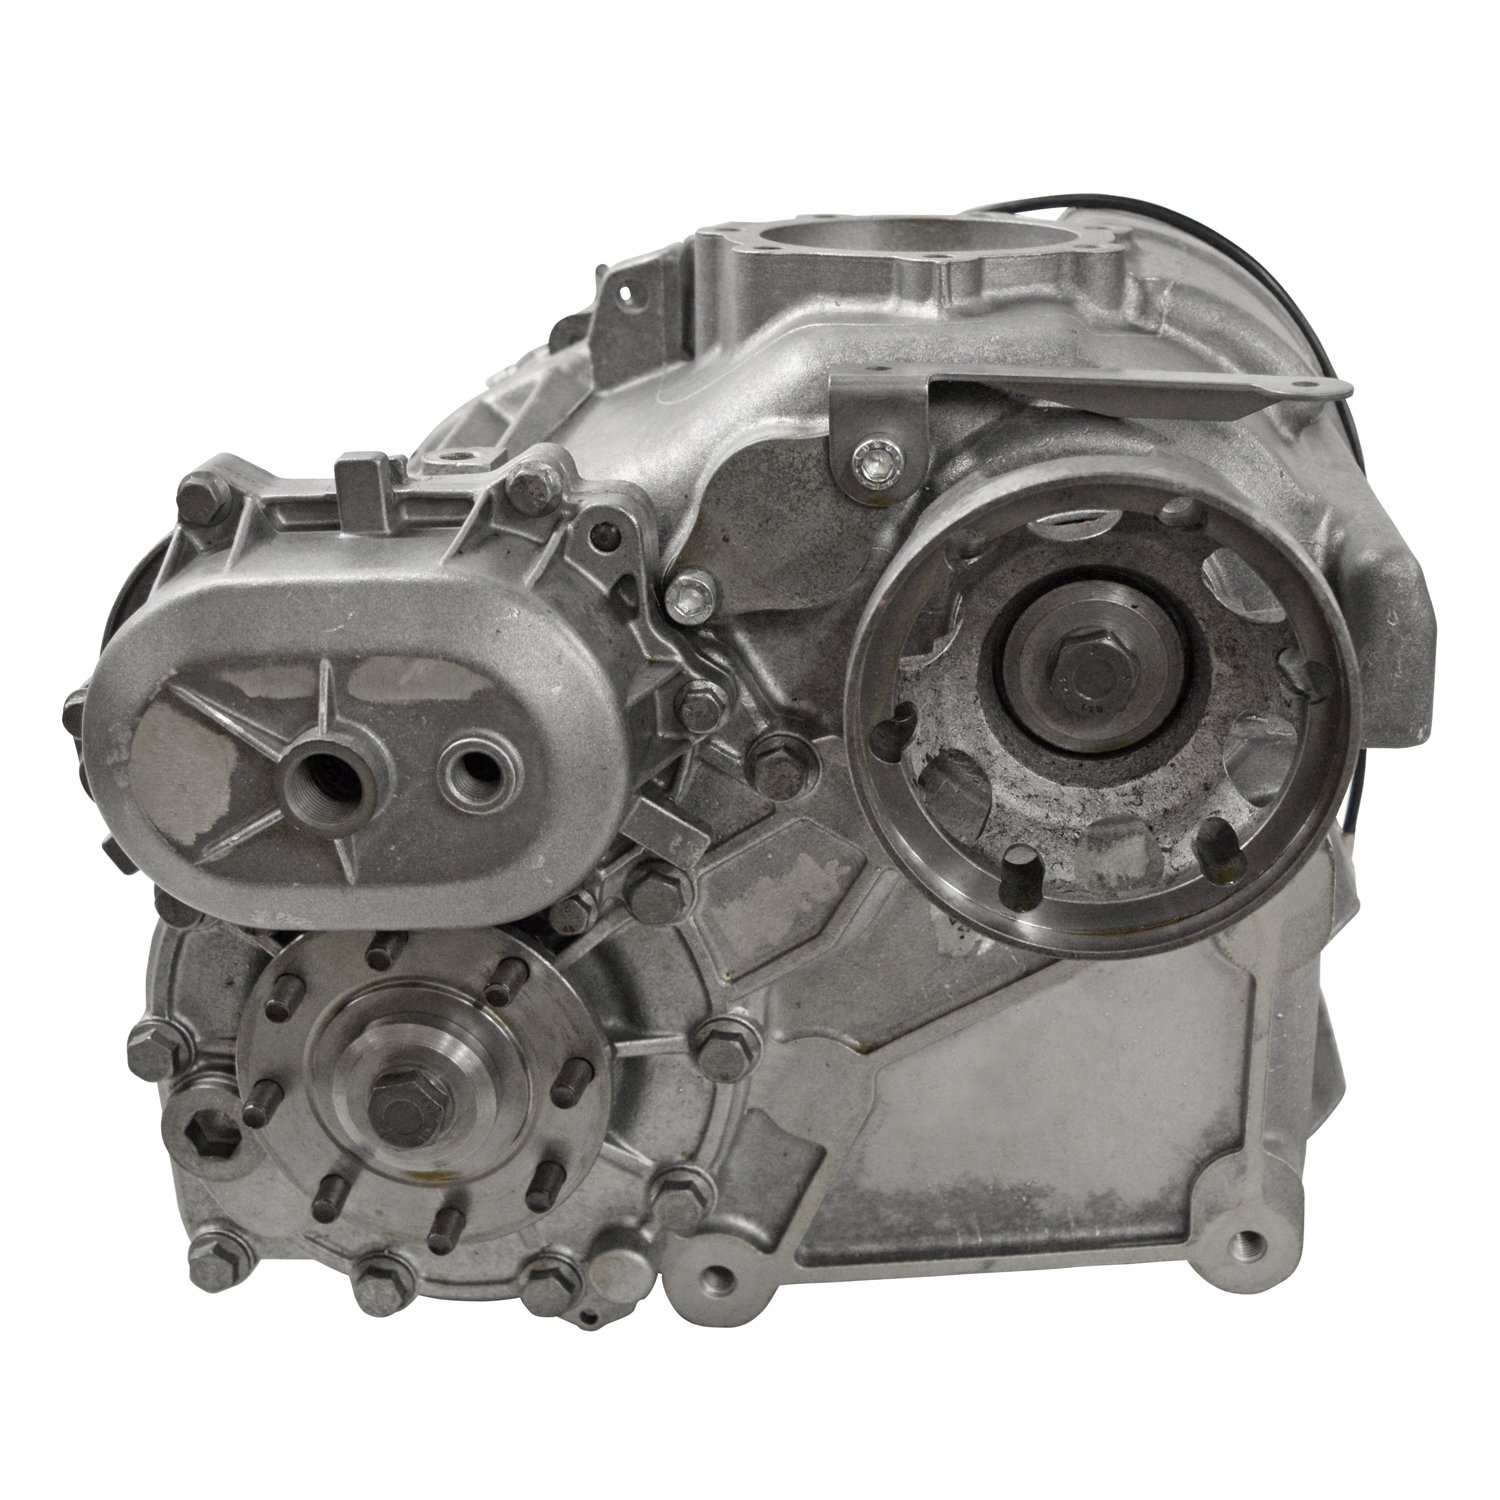 Remanufactured Transfer Case for 2002-2015 Mercedes G-Class